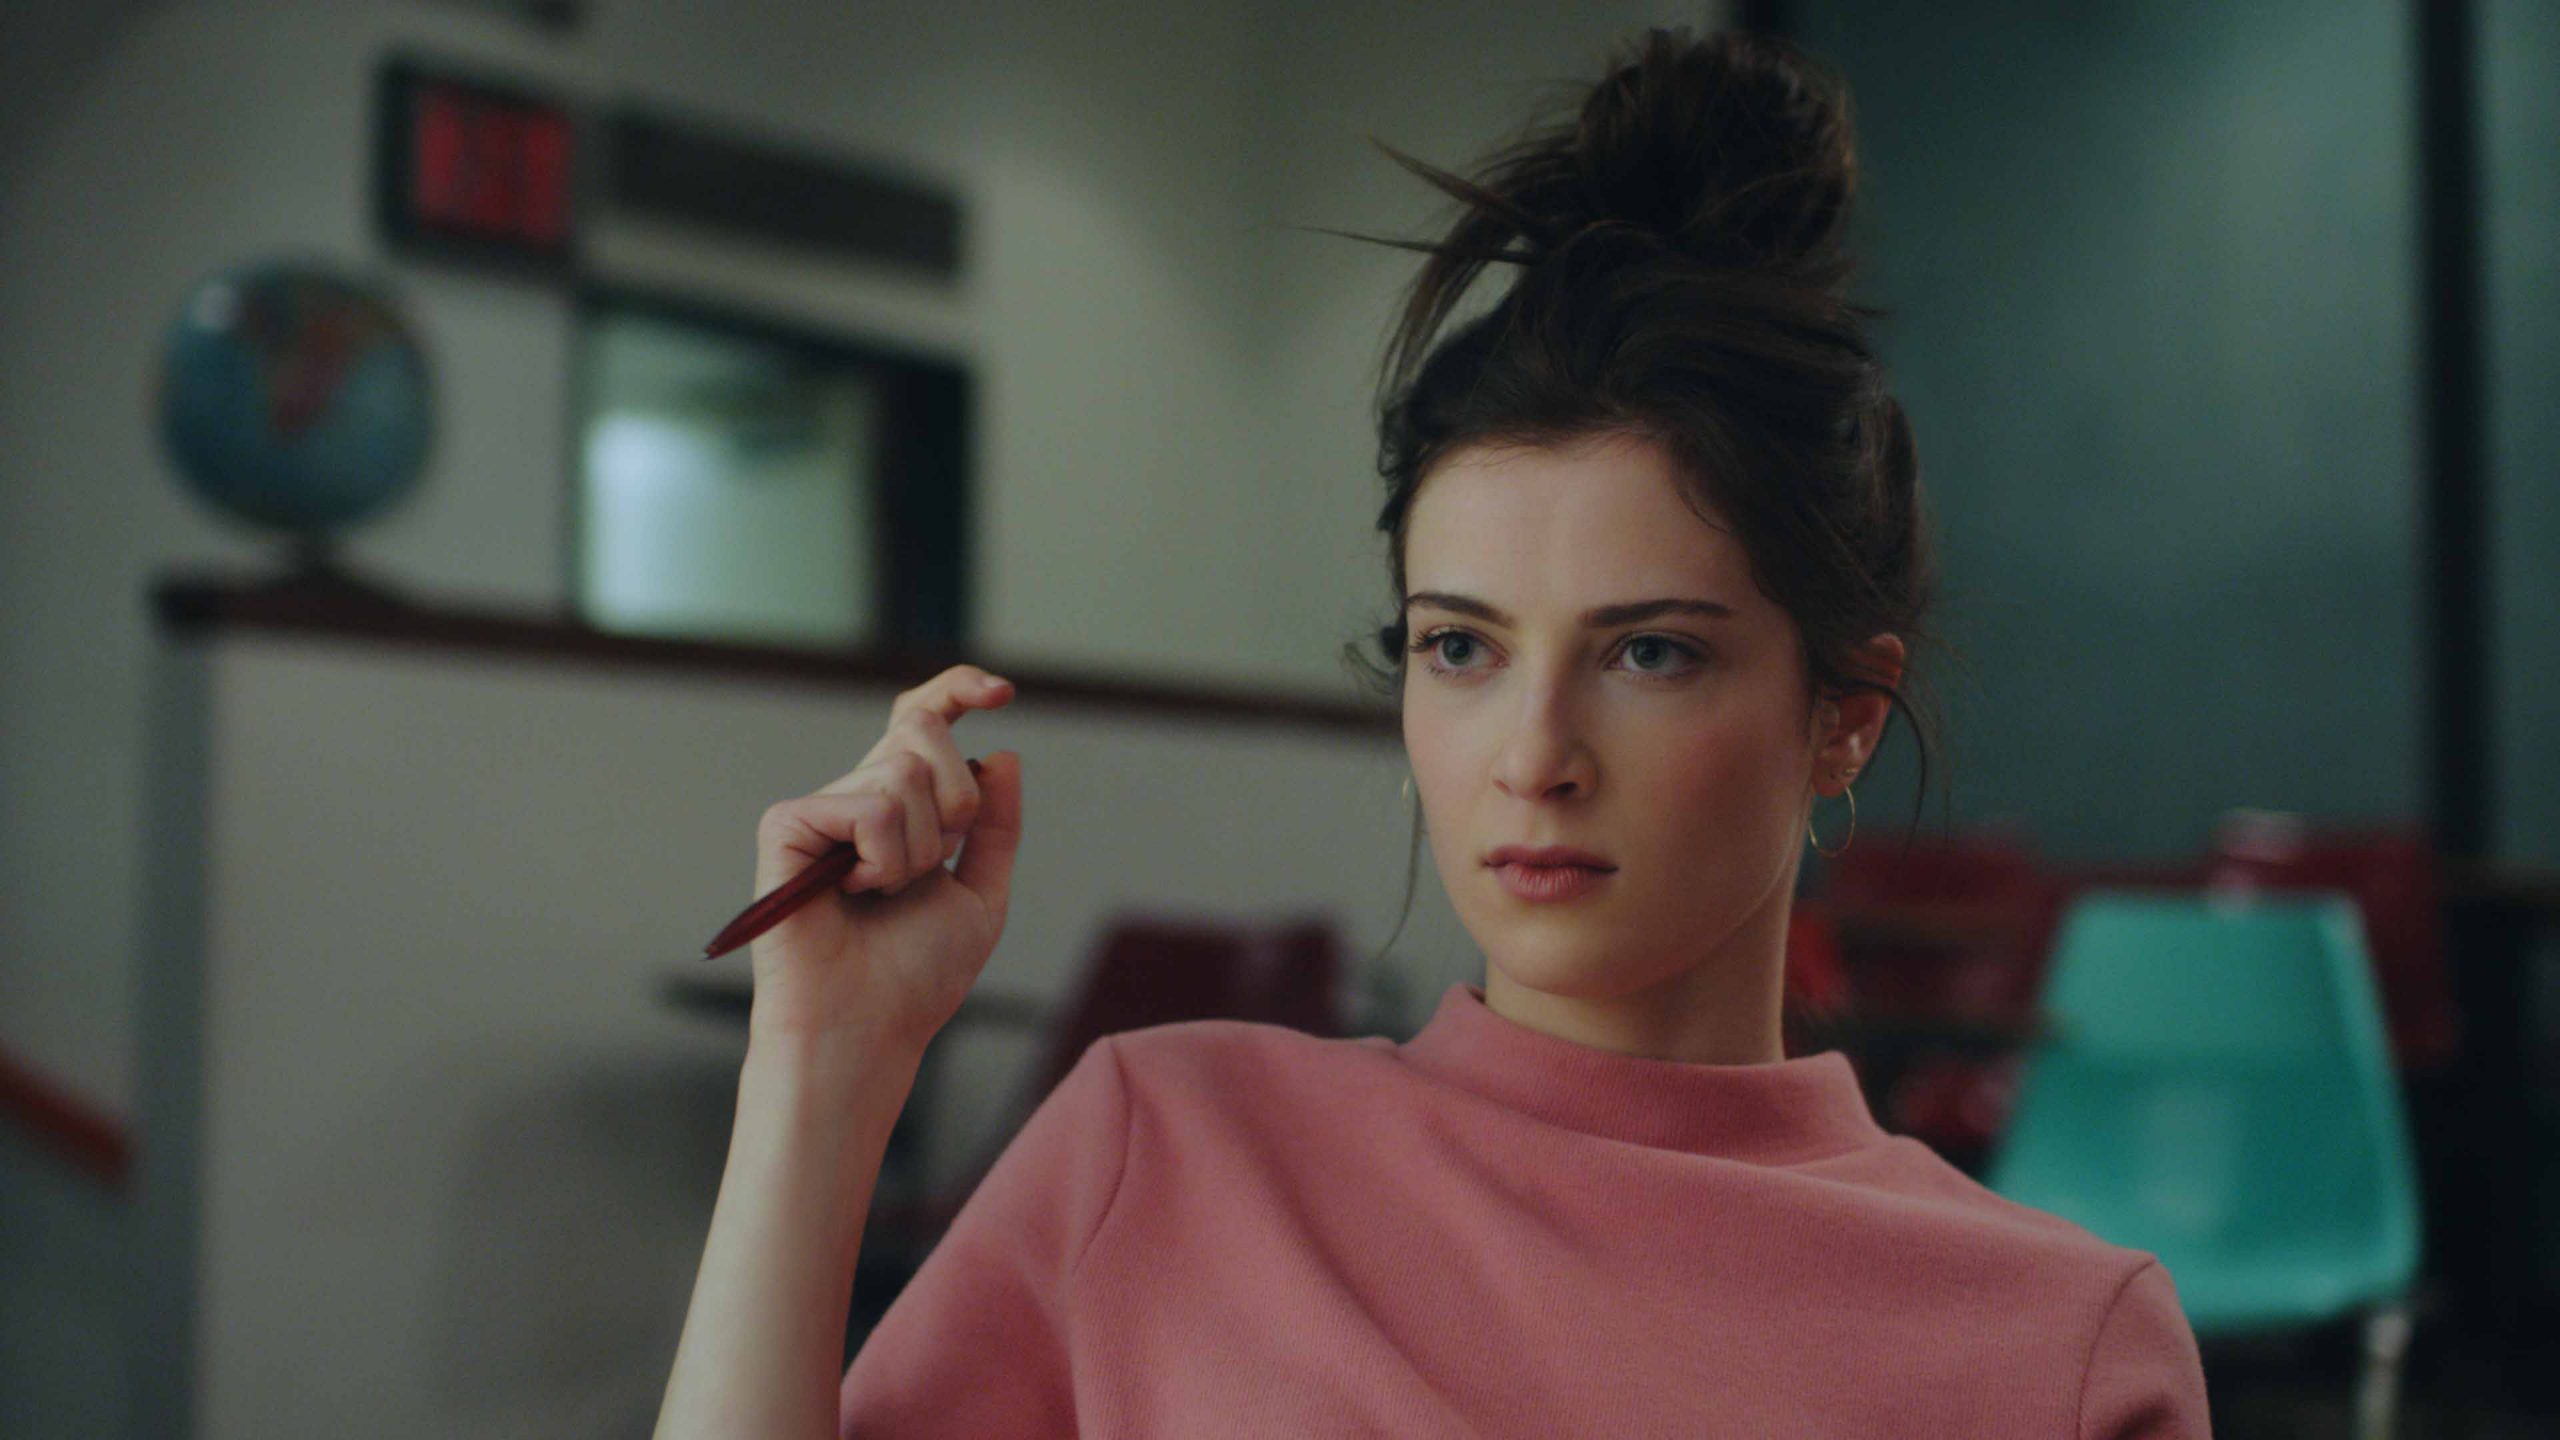 Zoe Levin From Bonding: Everything We Know